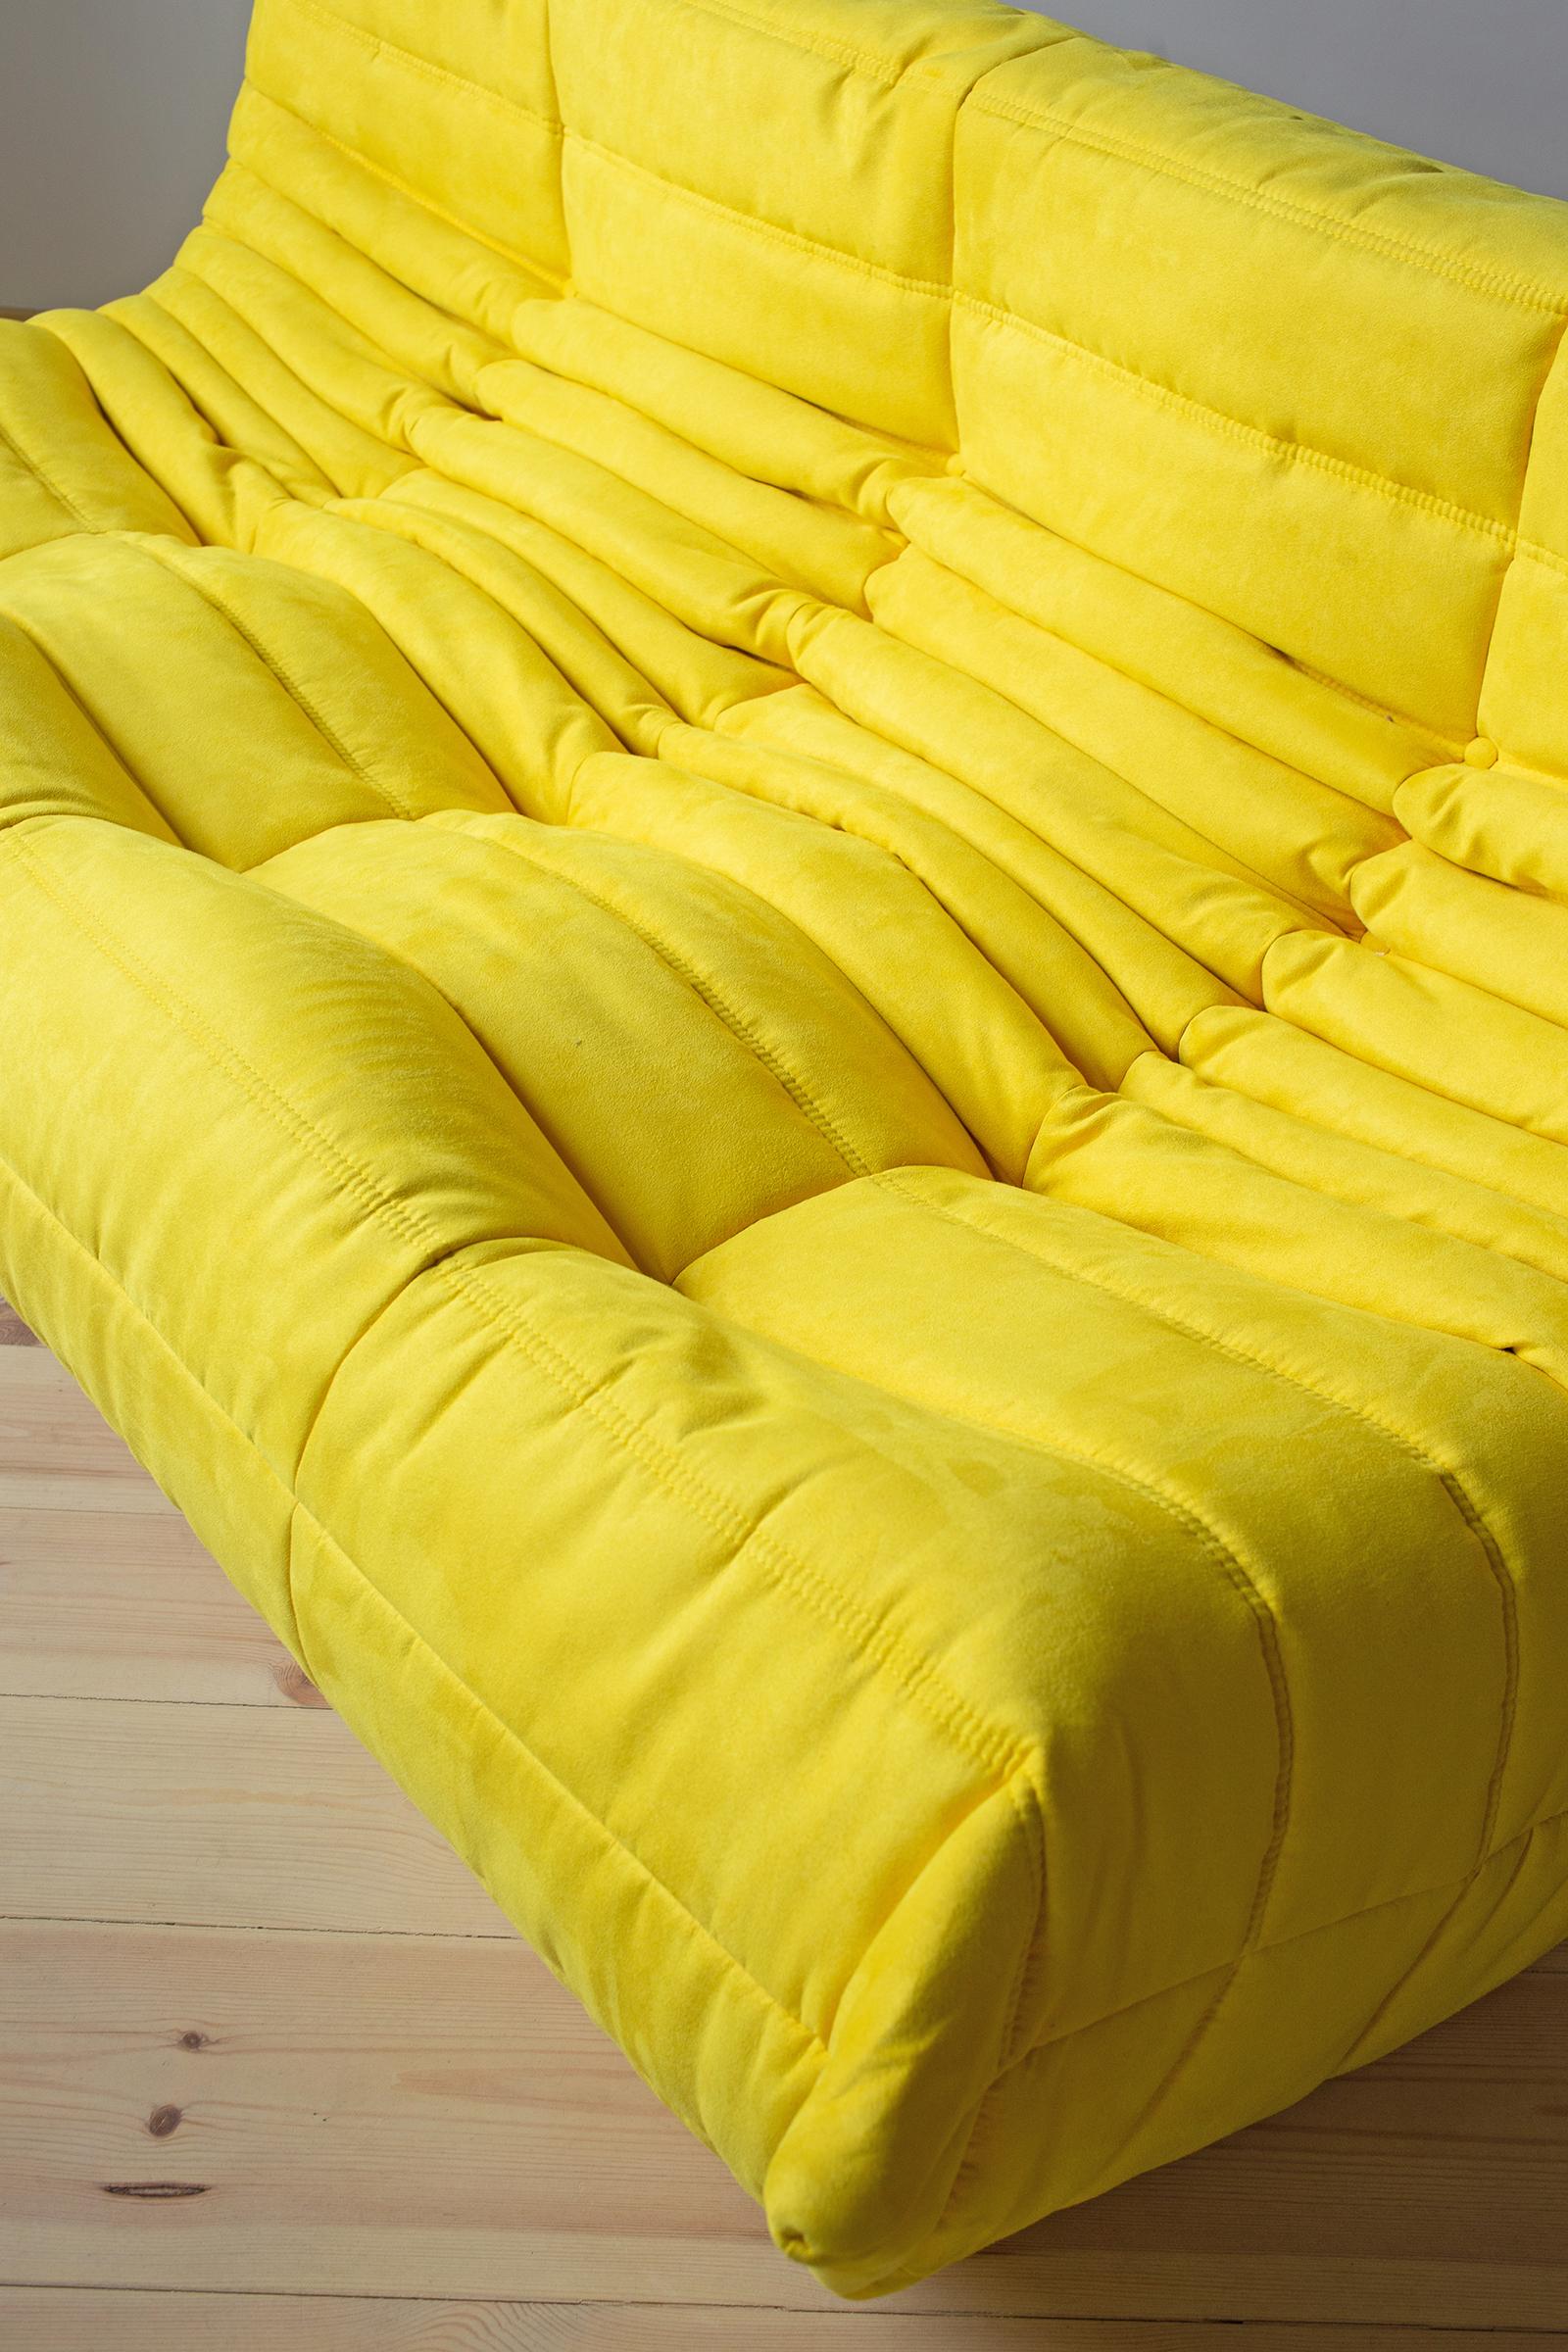 This togo three-seat sofa was designed by Michel Ducaroy in 1973 and was manufactured by Ligne Roset in France. It has been reupholstered in new yellow microfibre (70 x 174 x 102 cm). It has the original Ligne Roset logo and genuine Ligne Roset